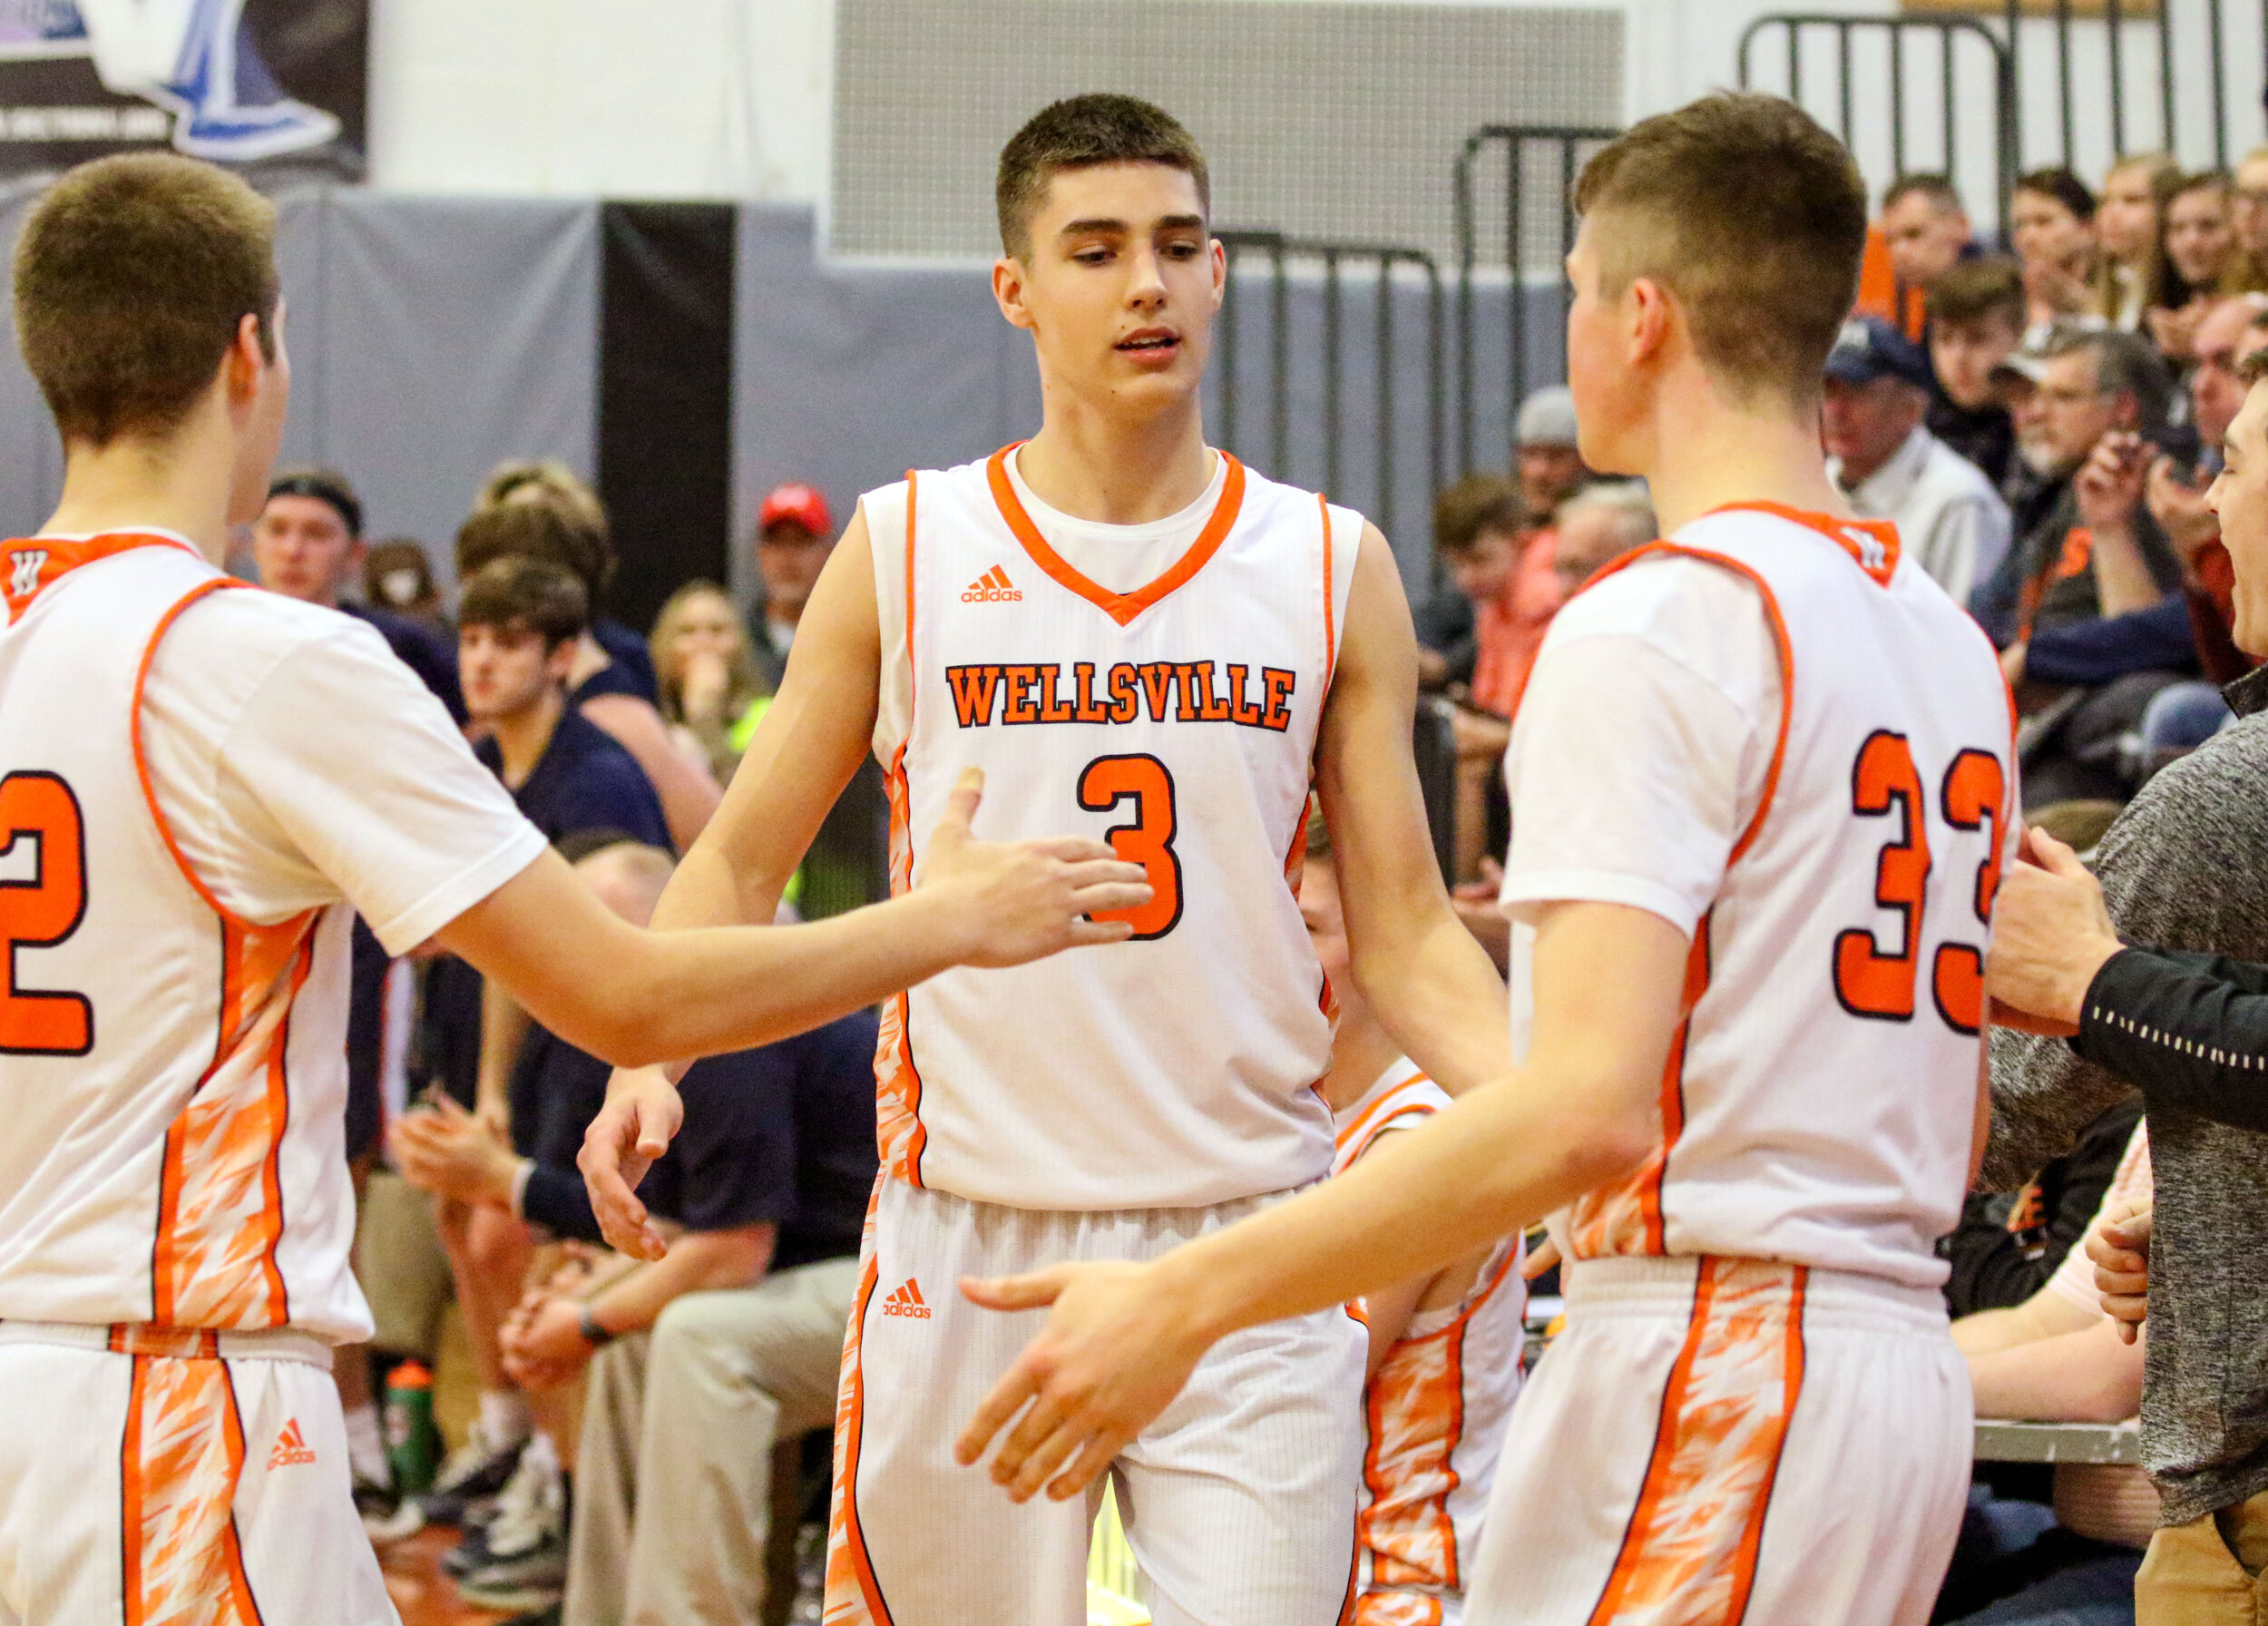  In this file photo, Wellsville senior Max Jusianiec (3) makes his way to the bench while being congratulated by his teammates Aidan Hart, left, and Brayden Delahunt (33) after the team’s Quarterfinal victory over Mynderse in Sectionals this past sea